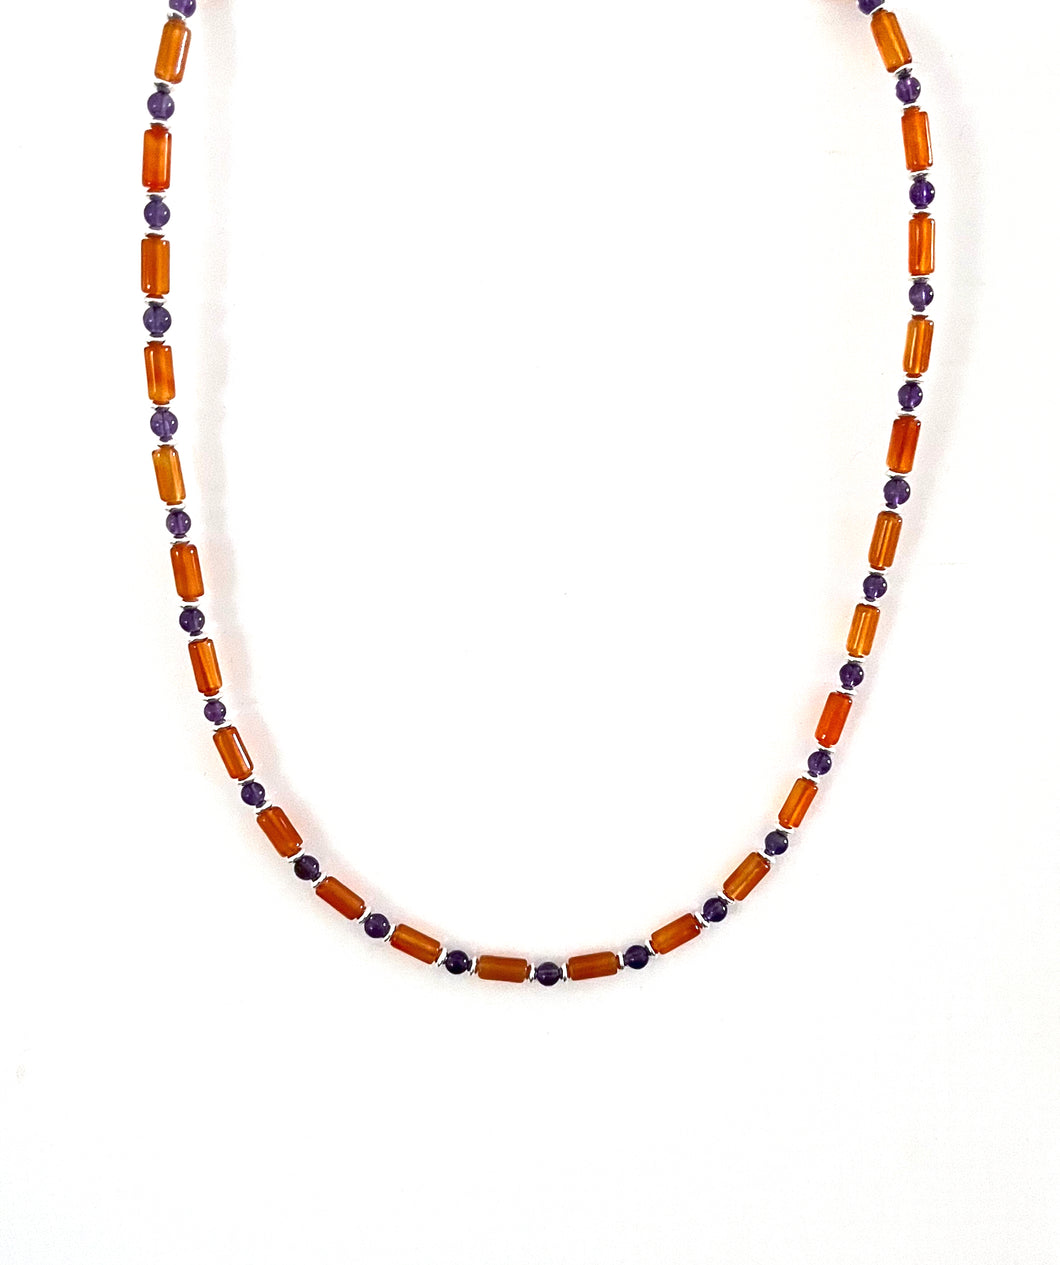 Australian Handmade Orange Necklace with Agate Amethyst and Sterling Silver